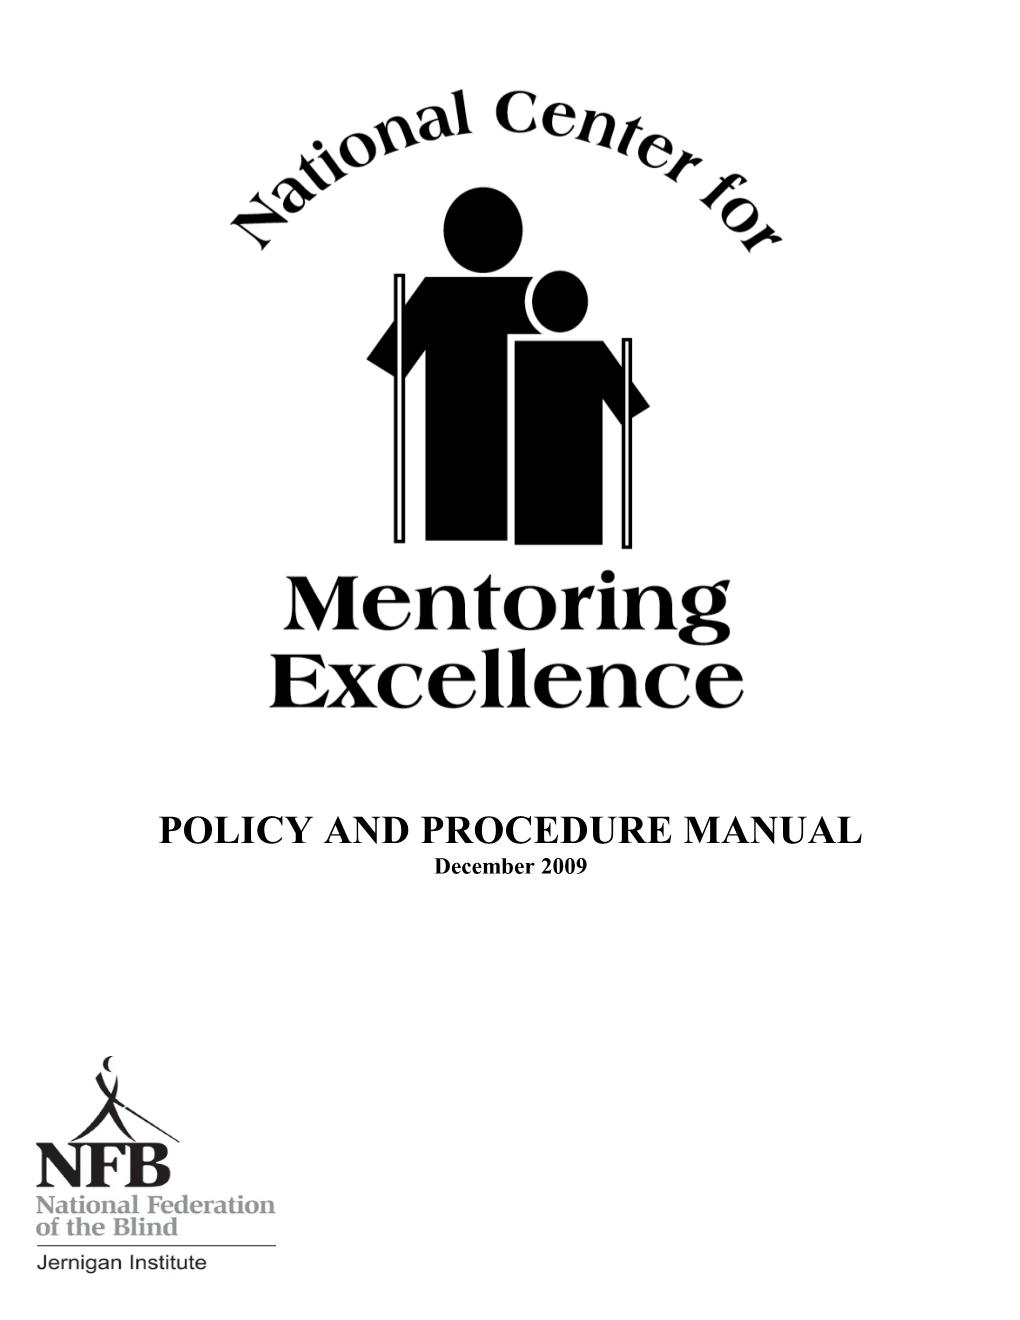 Policy and Procedure Manual s1